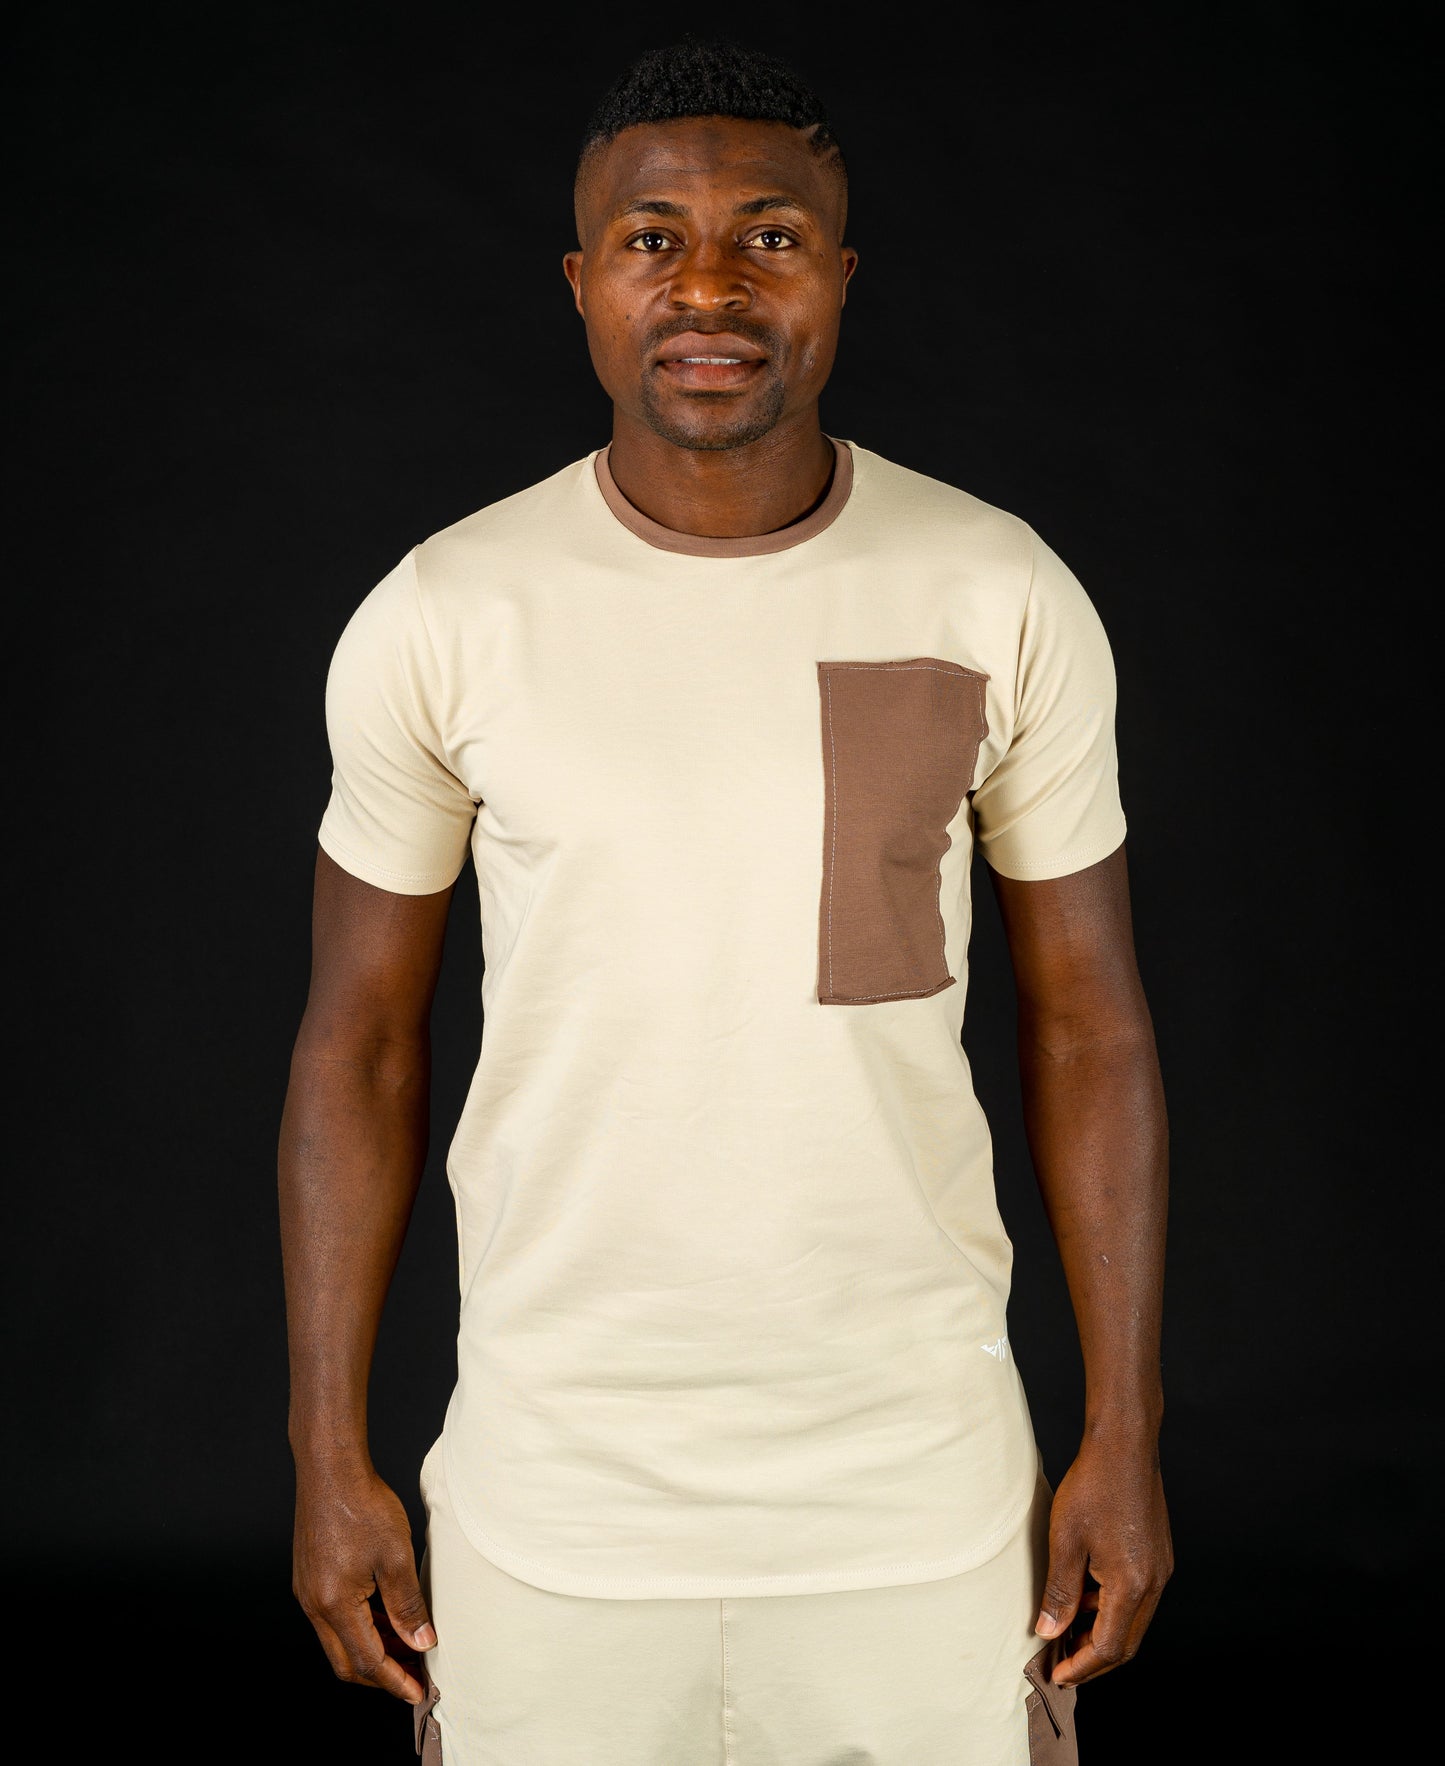 Beige t-shirt with brown design - Fatai Style